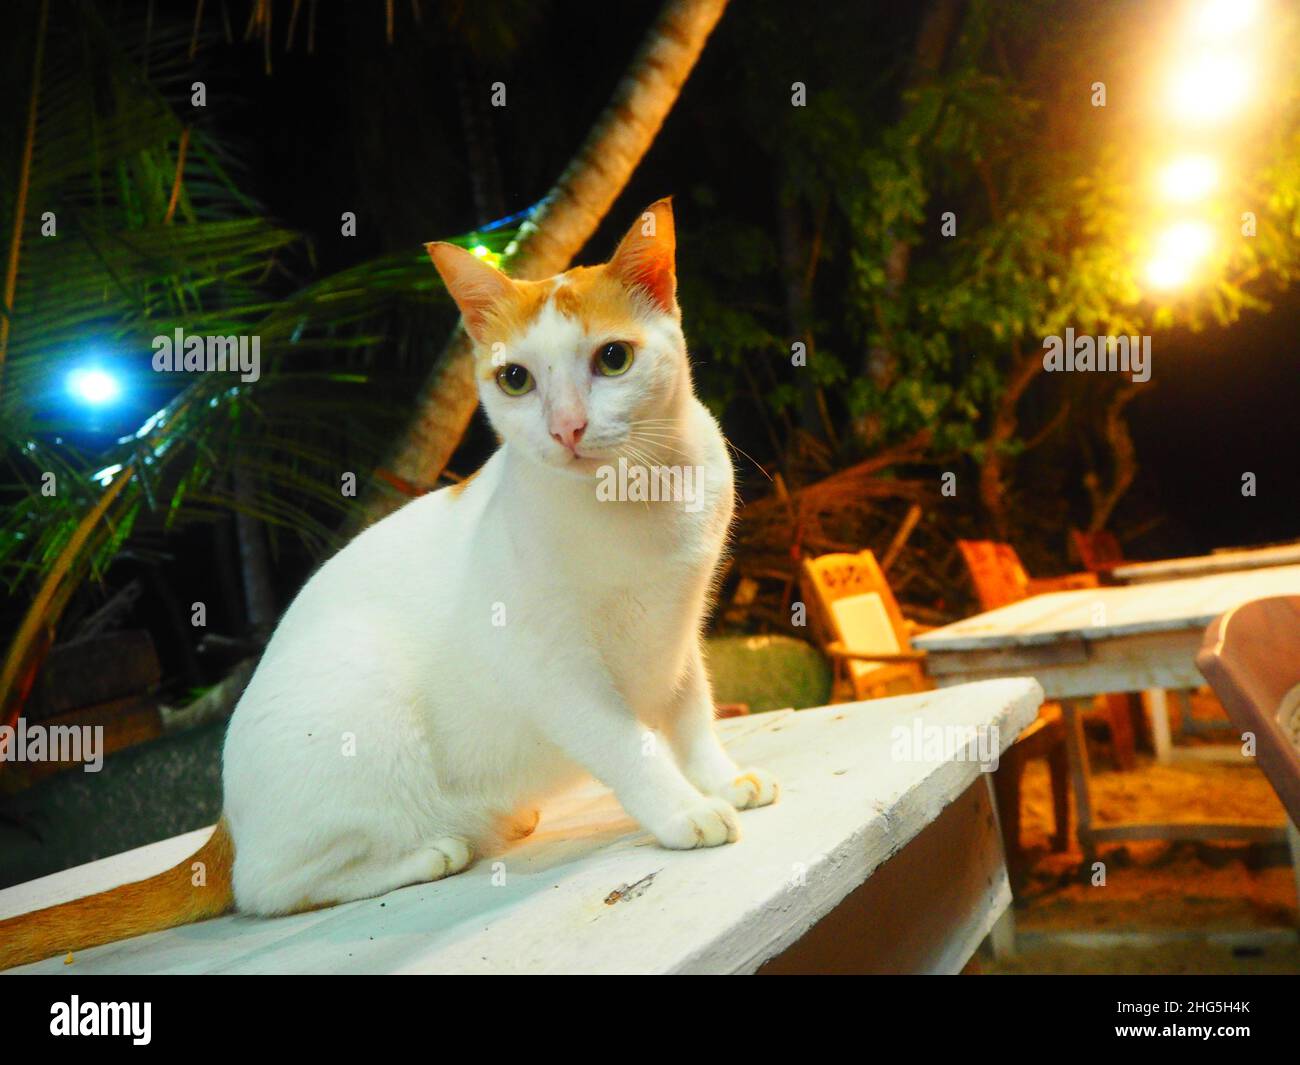 Cute Cate on Table in a Beach Bar #Wildlife #Meme #Authentic #fernweh #slowtravel #stayinspired #TravelAgain Foto Stock